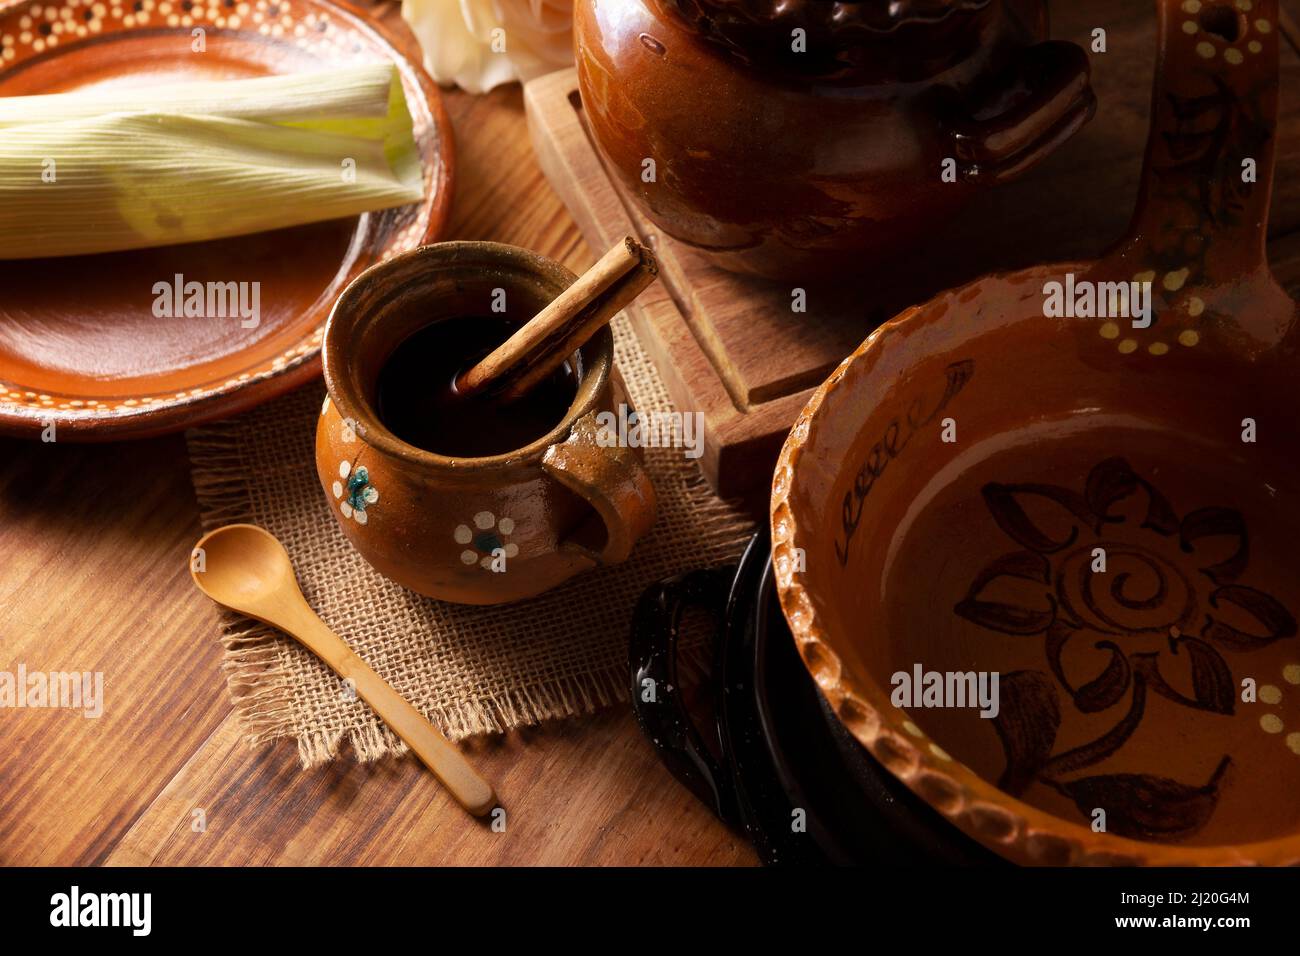 https://c8.alamy.com/comp/2J20G4M/authentic-homemade-mexican-coffee-cafe-de-olla-served-in-traditional-clay-mug-jarrito-de-barro-on-rustic-wooden-table-2J20G4M.jpg